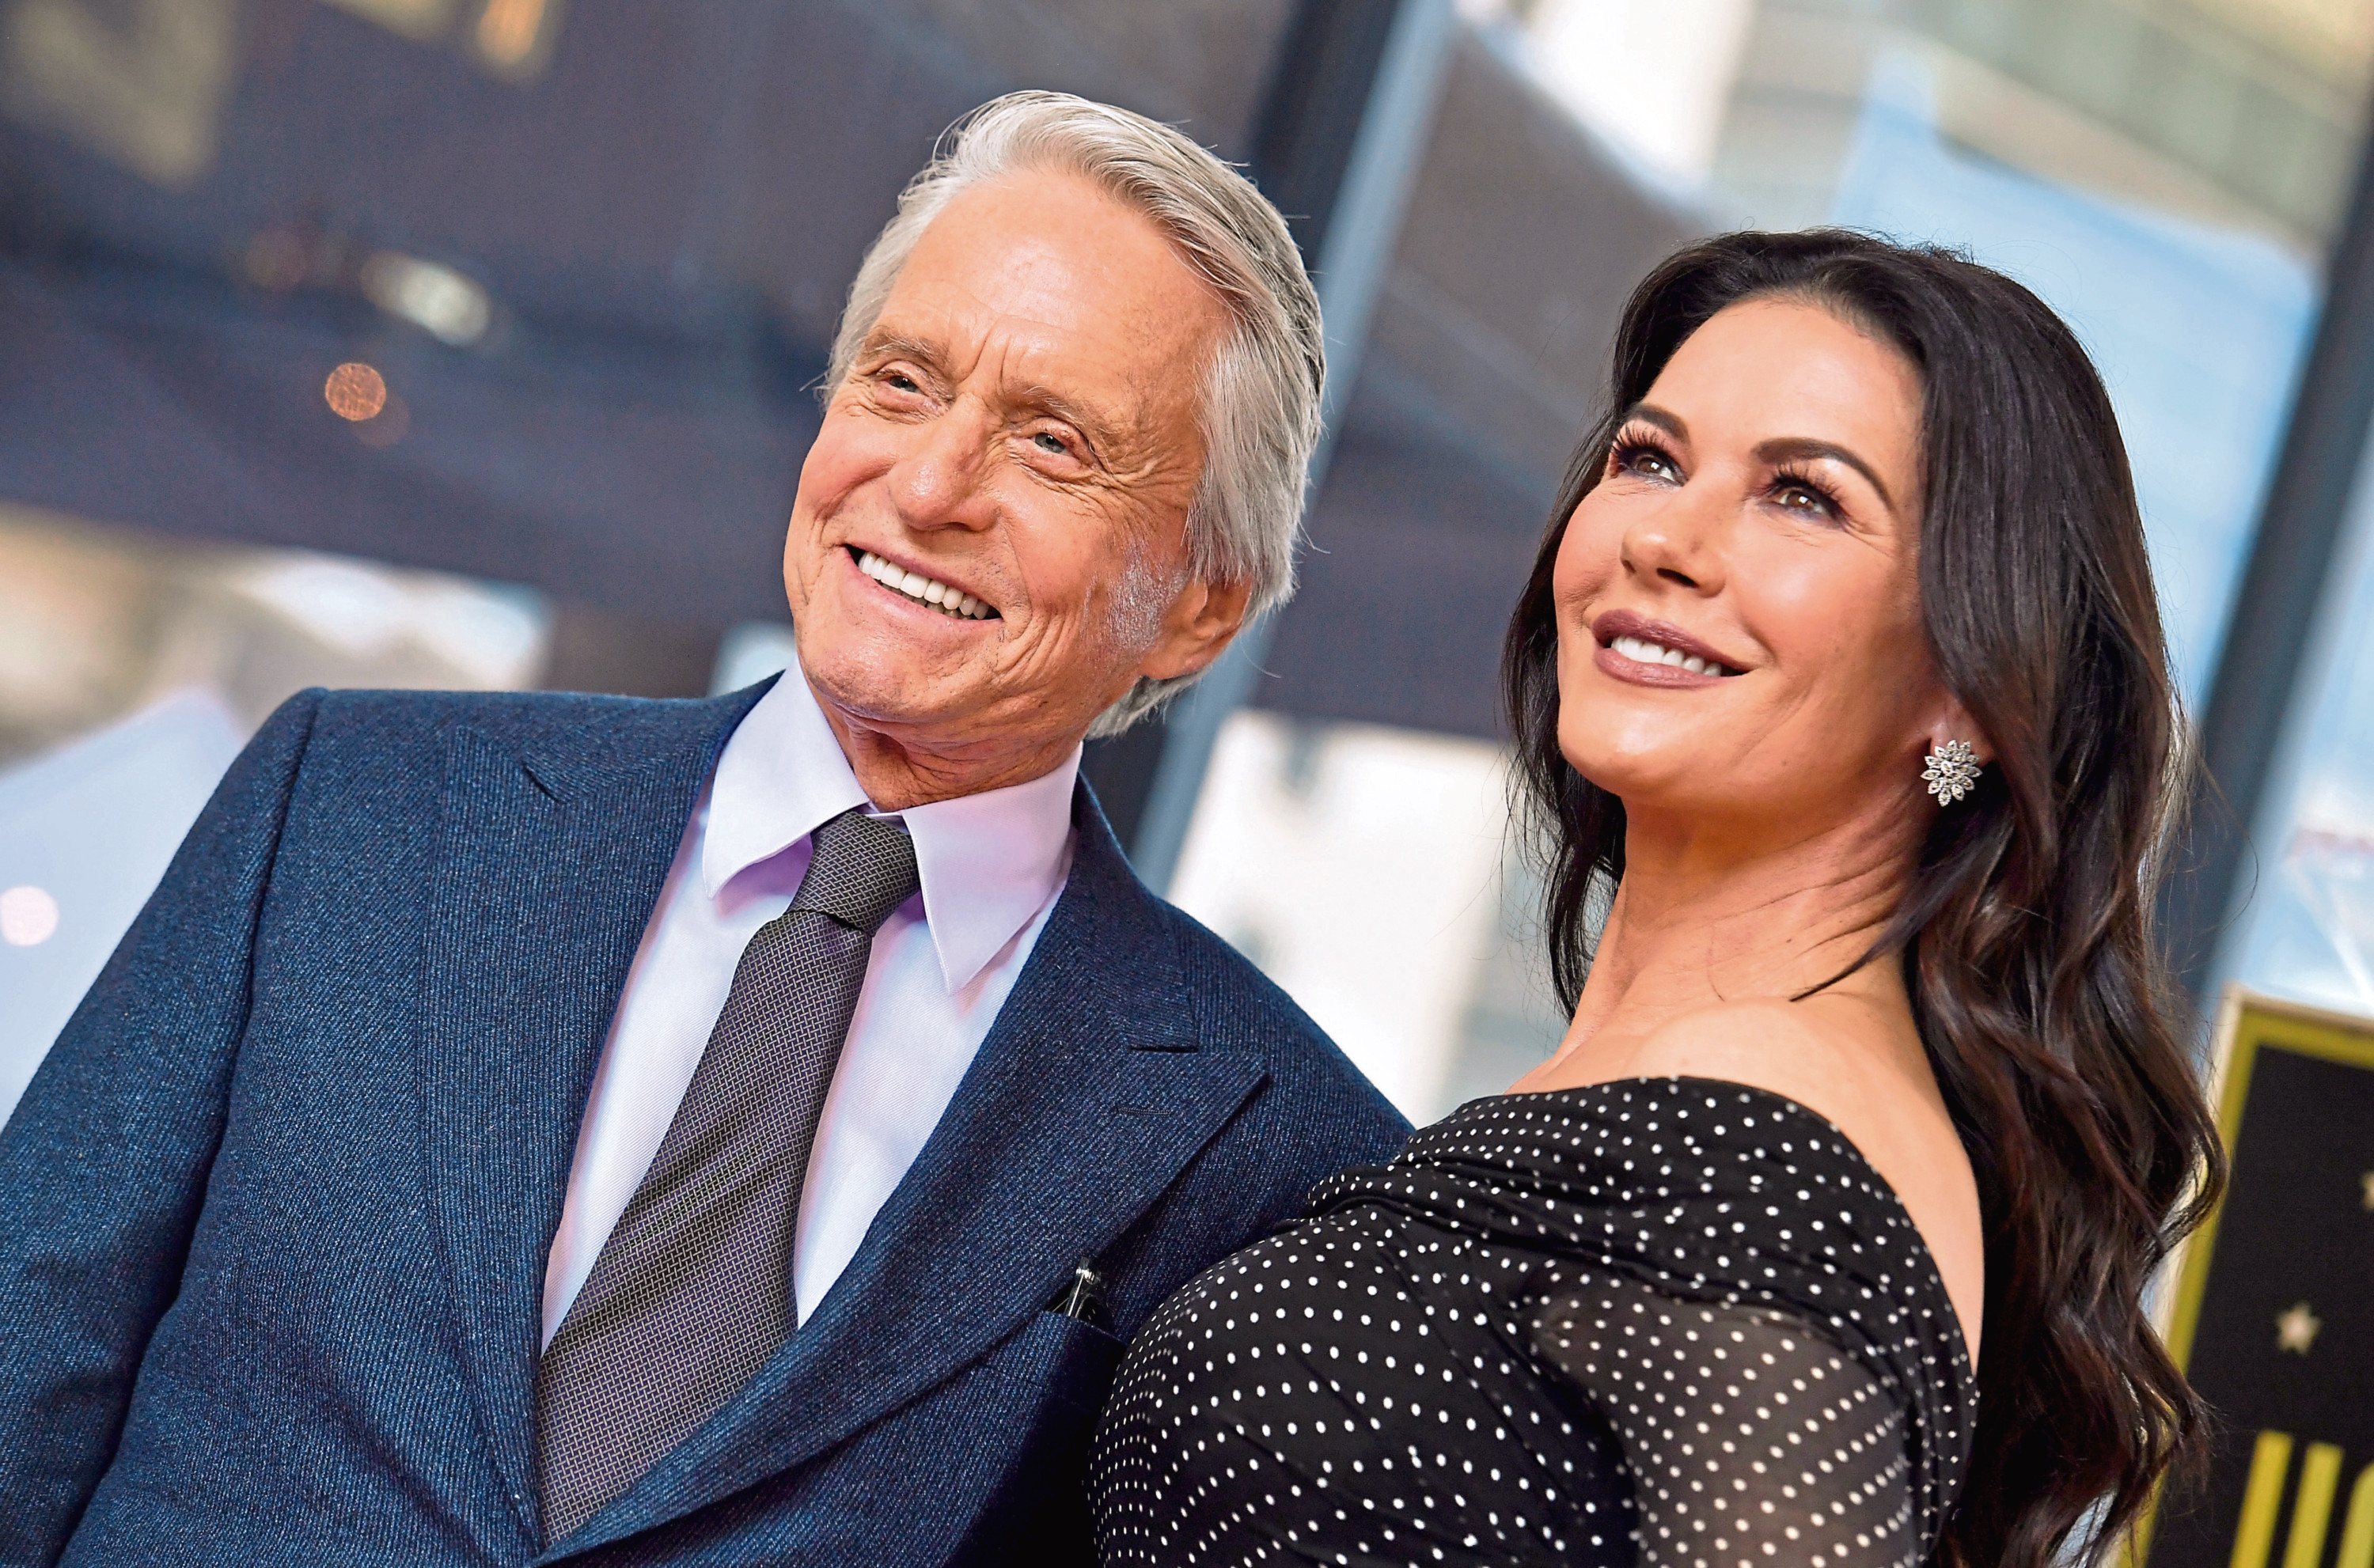 HOLLYWOOD, CA - NOVEMBER 06:  Michael Douglas and Catherine Zeta-Jones attend the ceremony honoring Michael Douglas with star on the Hollywood Walk of Fame on November 06, 2018 in Hollywood, California.  (Photo by Axelle/Bauer-Griffin/FilmMagic)